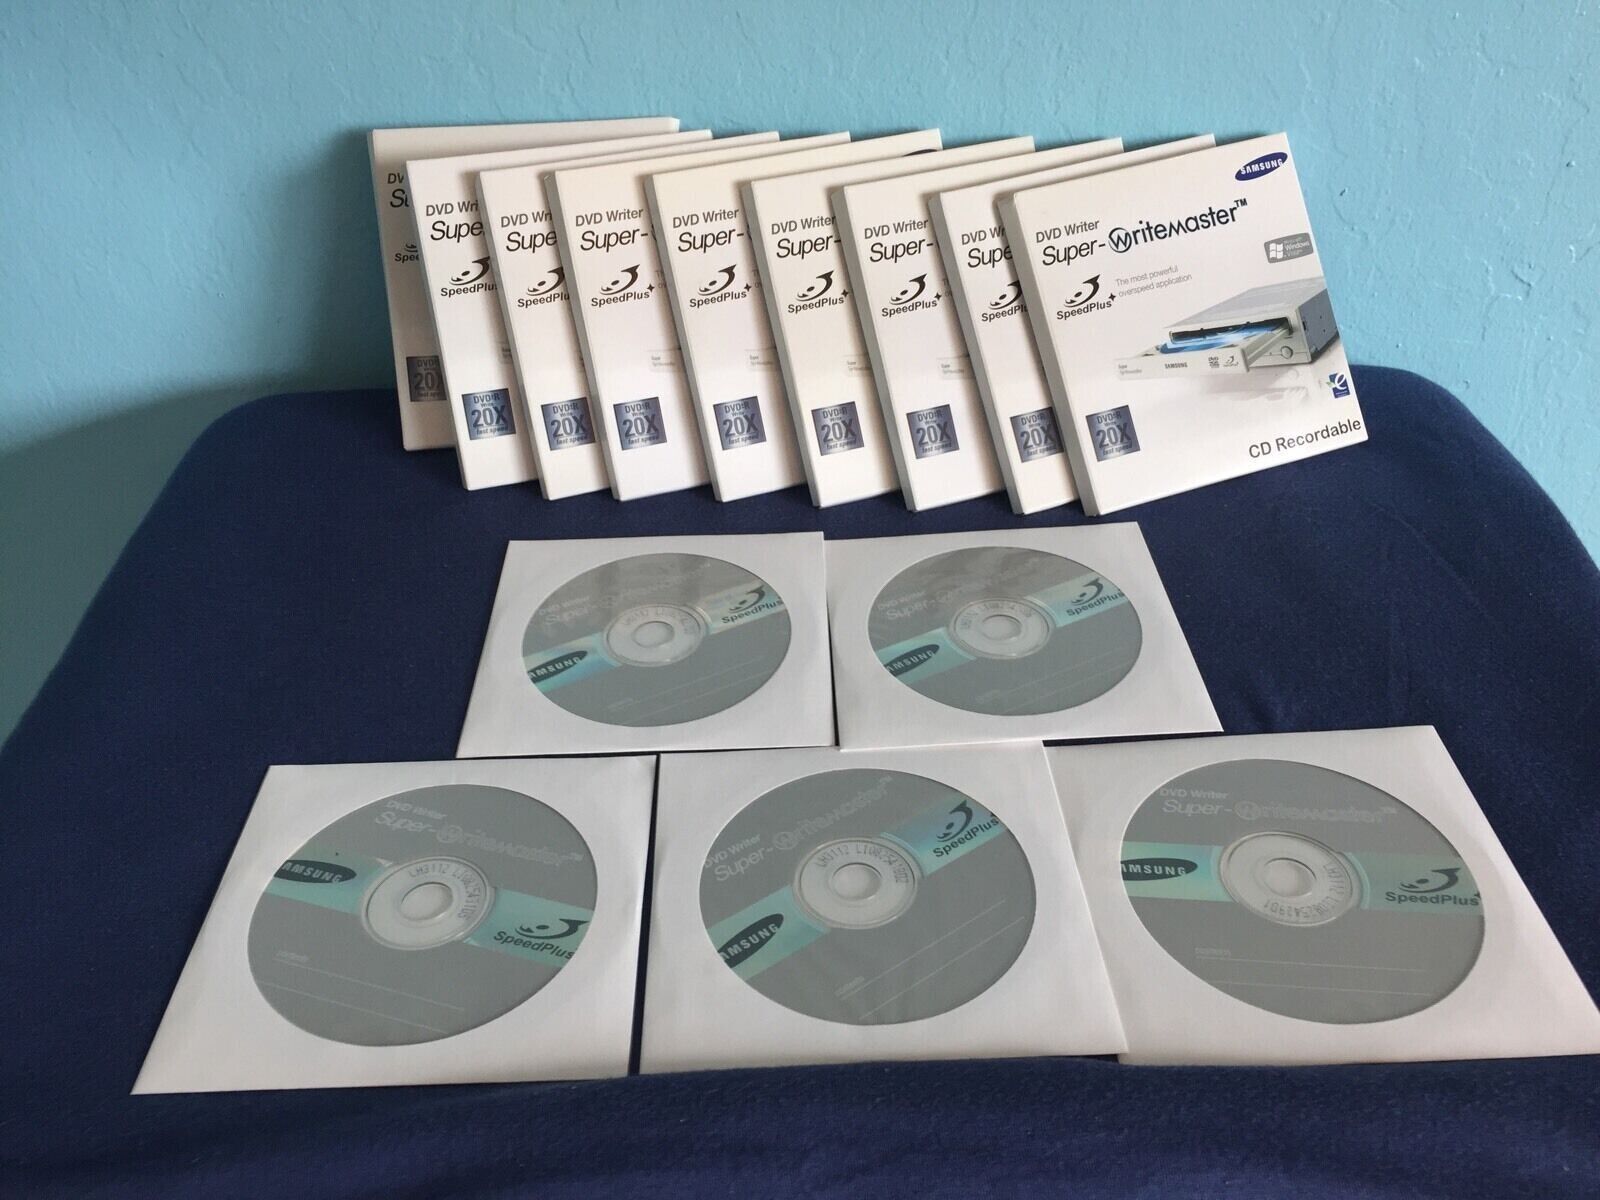 Lot of 10 - 5 Pieces 20X Samsung DVD Writer Supermaster-Writer CD Recordable